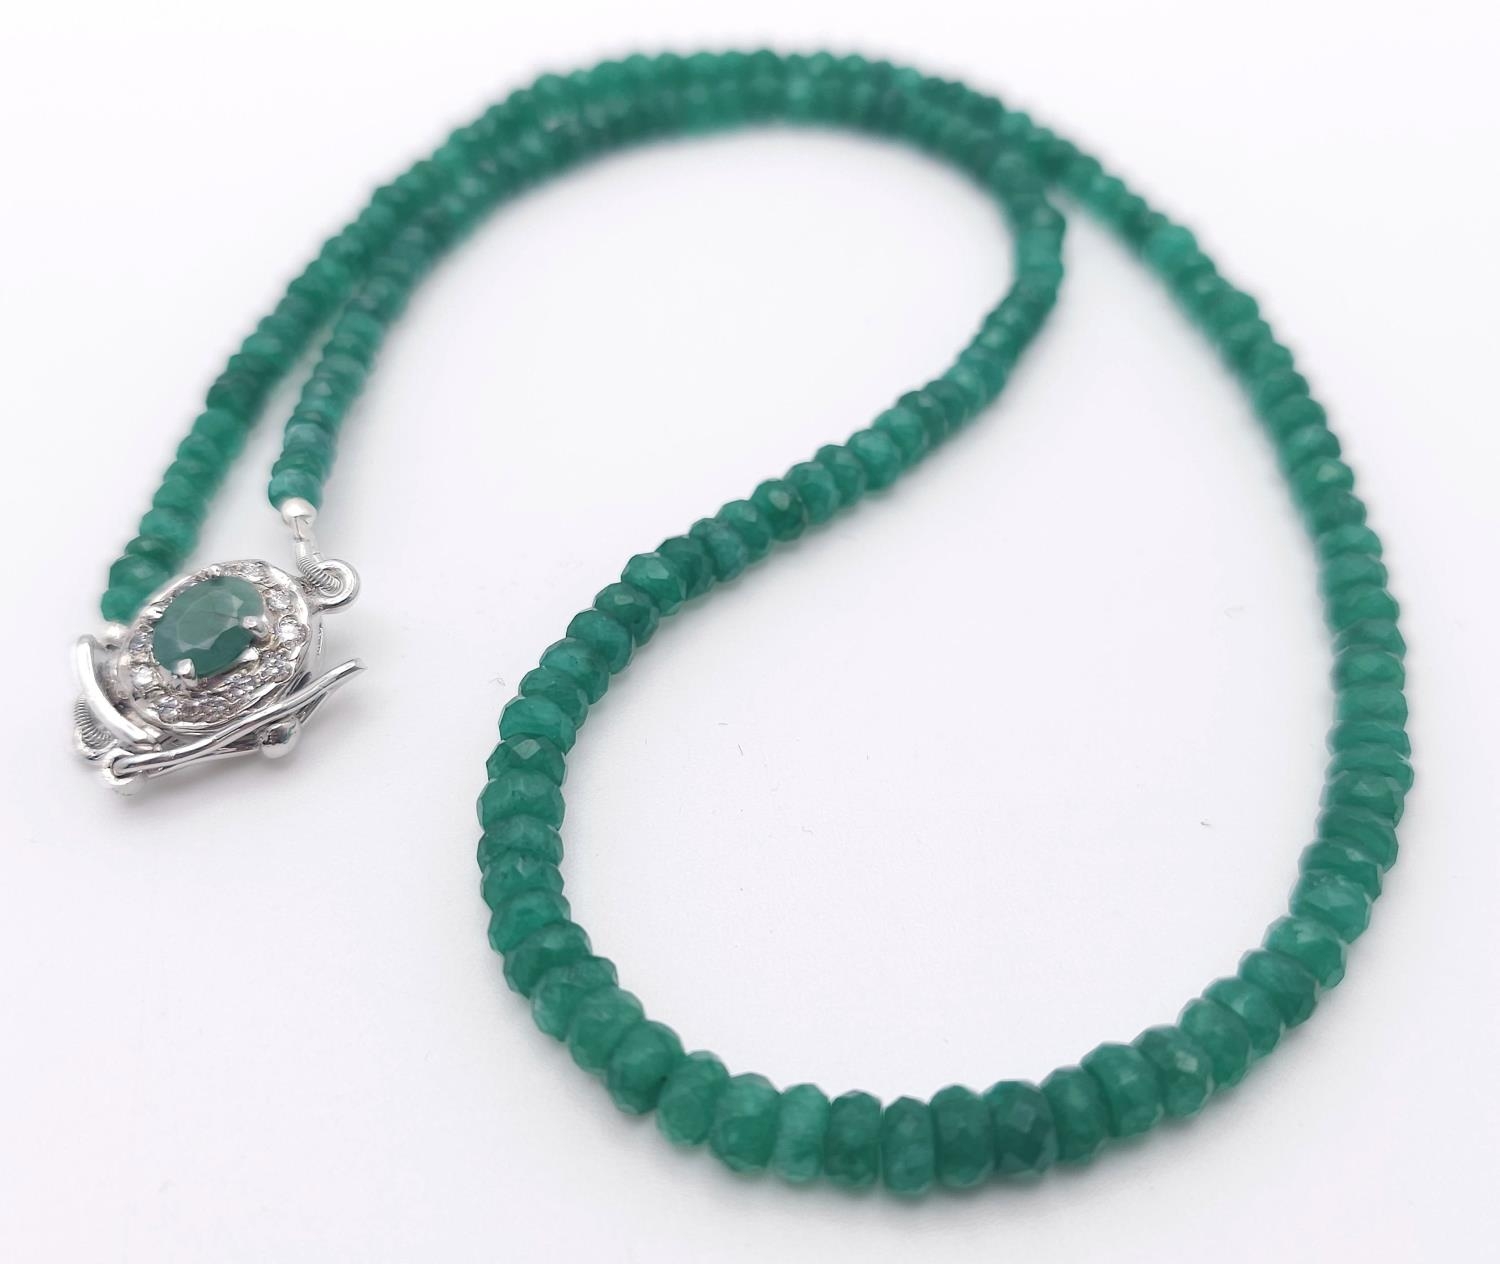 A 95ctw Emerald Gemstone Rondelle Single Strand Necklace - with Emerald and 925 Silver clasp.